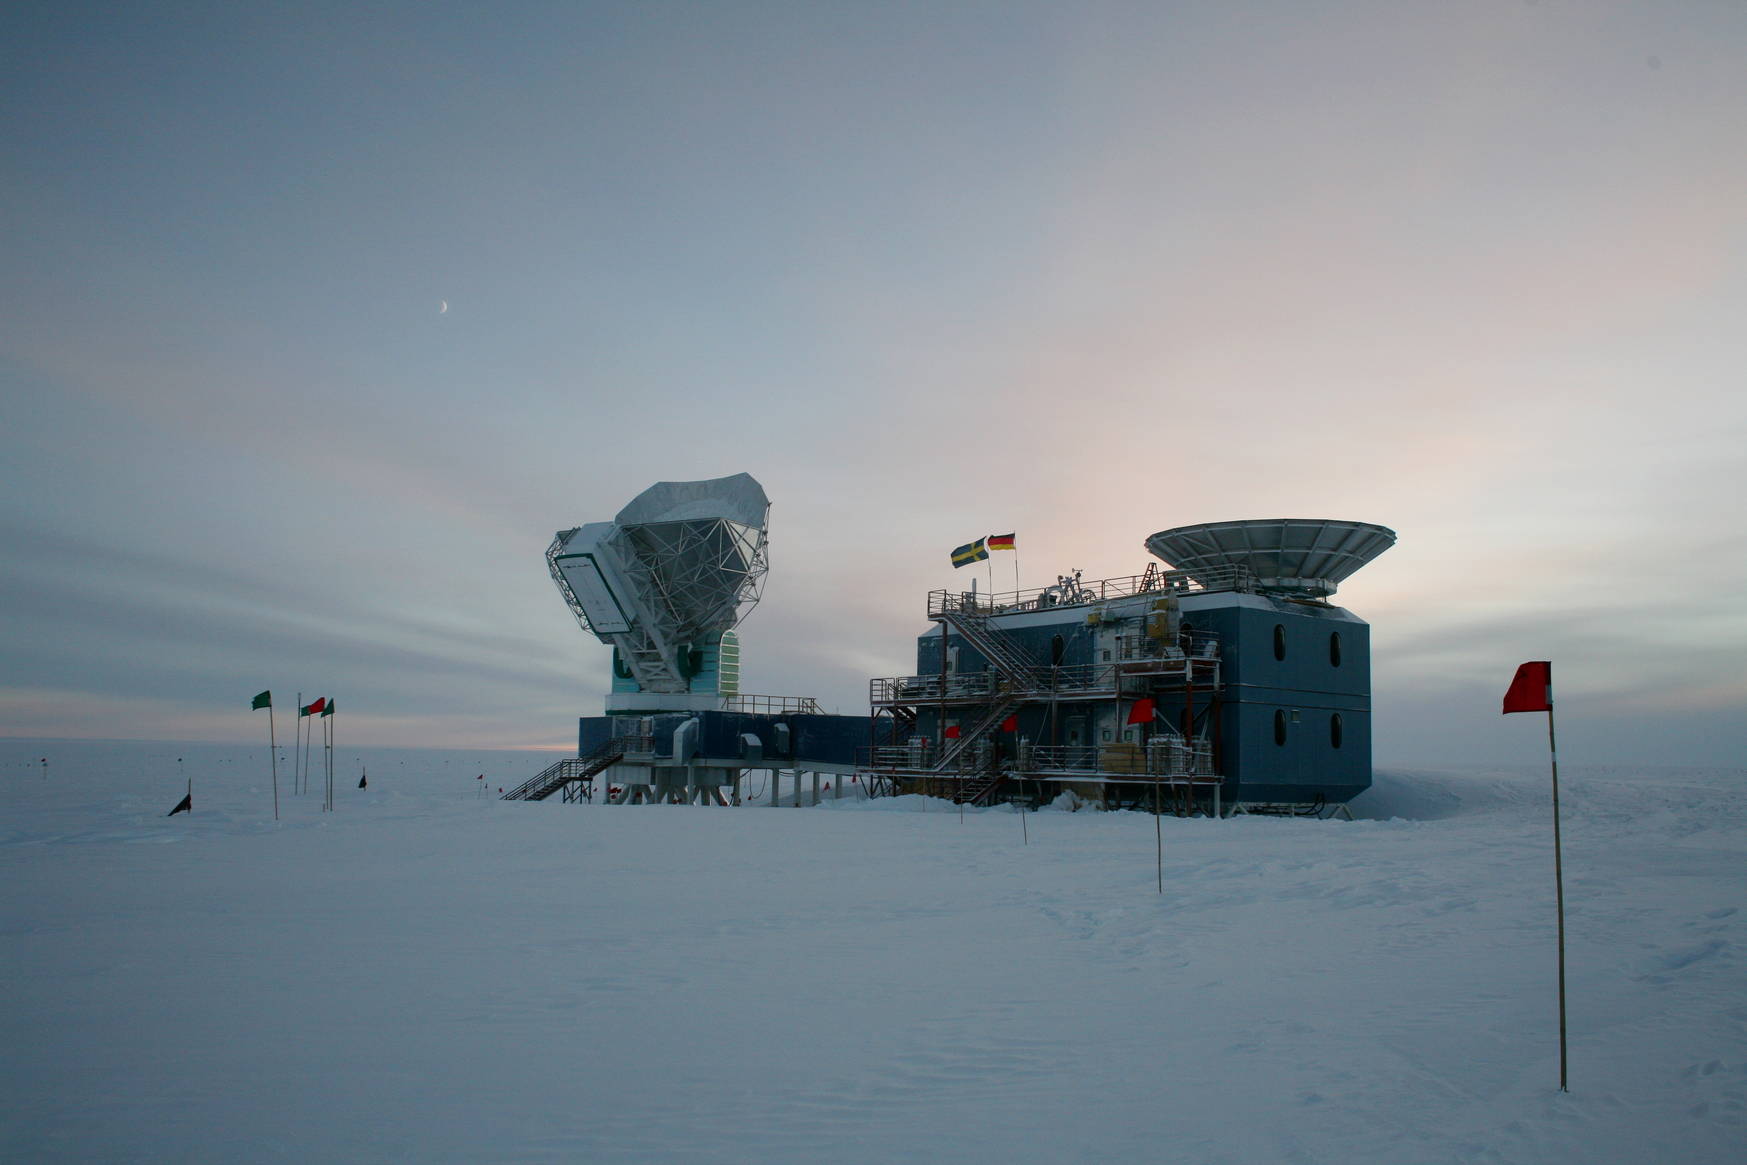 The South Pole Telescope during the sunset (opposite from the sun). Did you notice the moon?